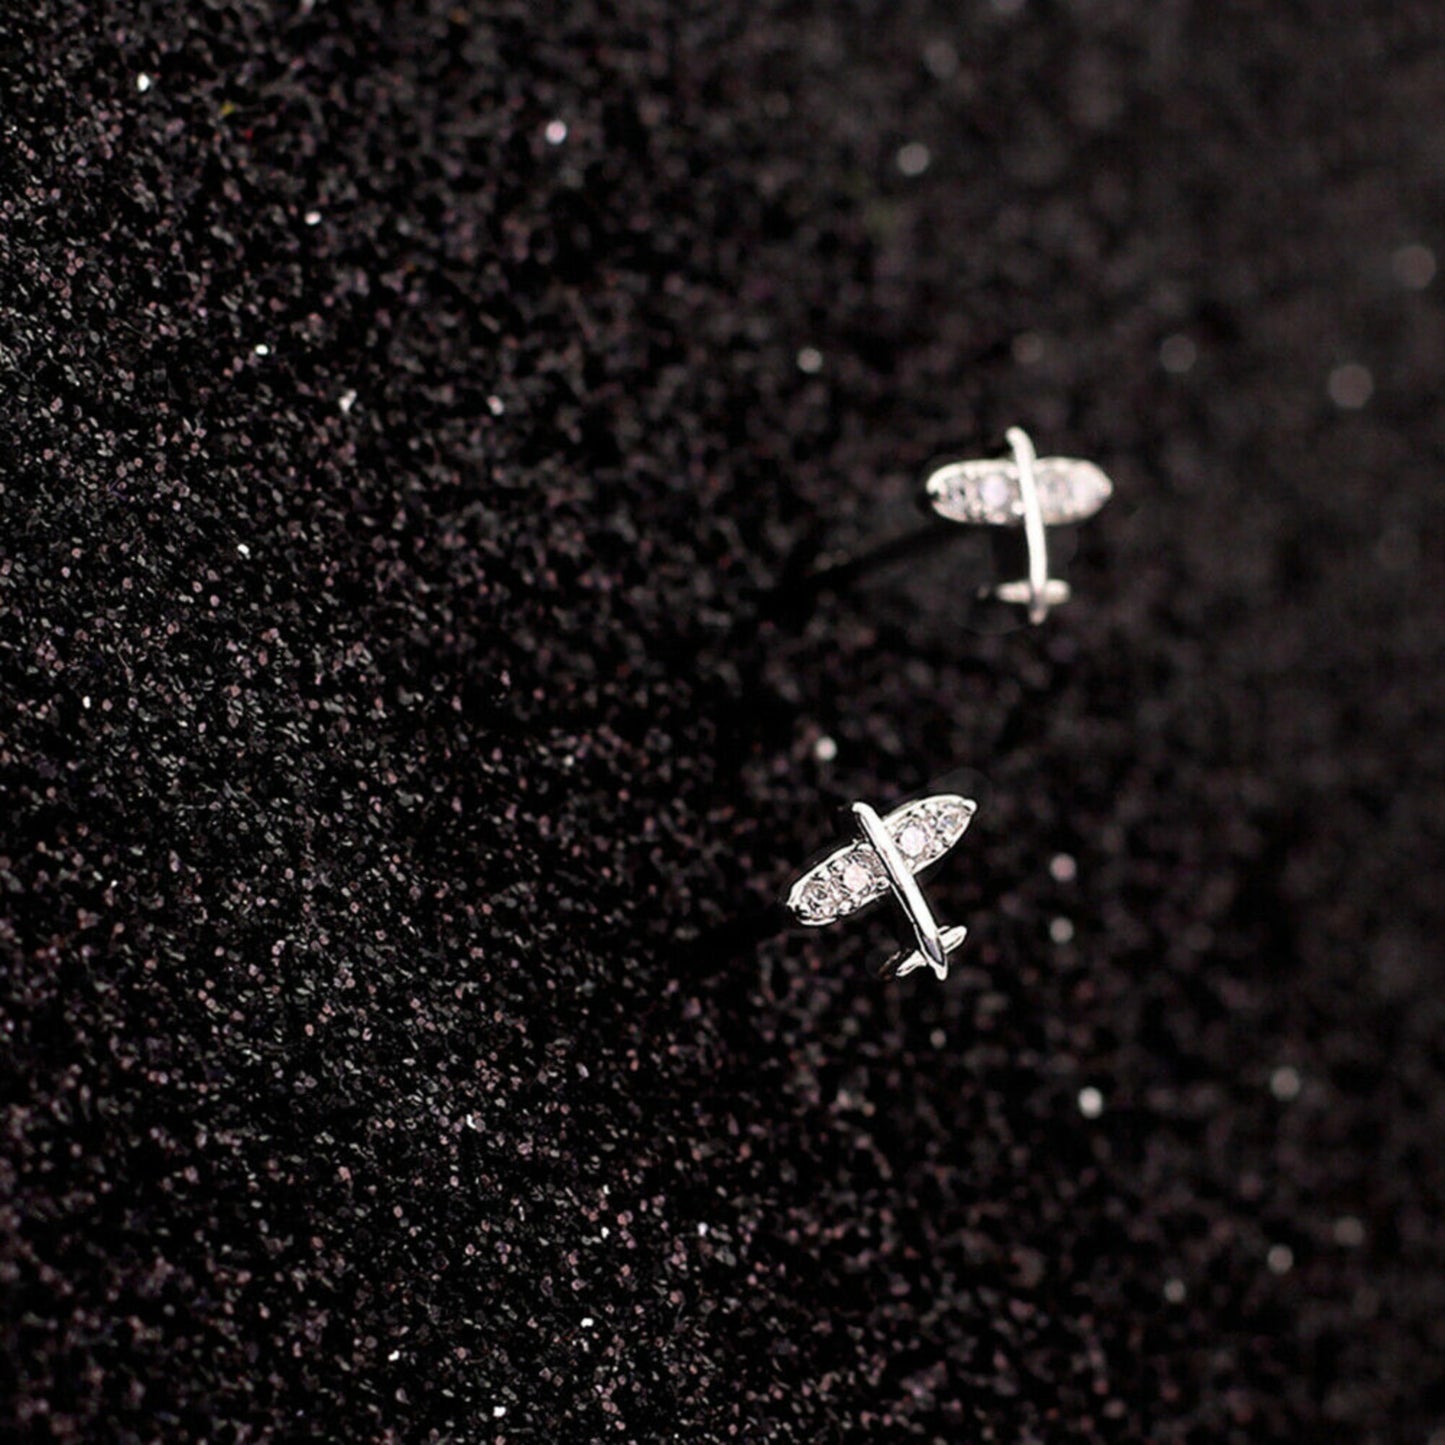 Mini CZ Airplane Stud Earrings in Sterling Silver with Rhodium Plating